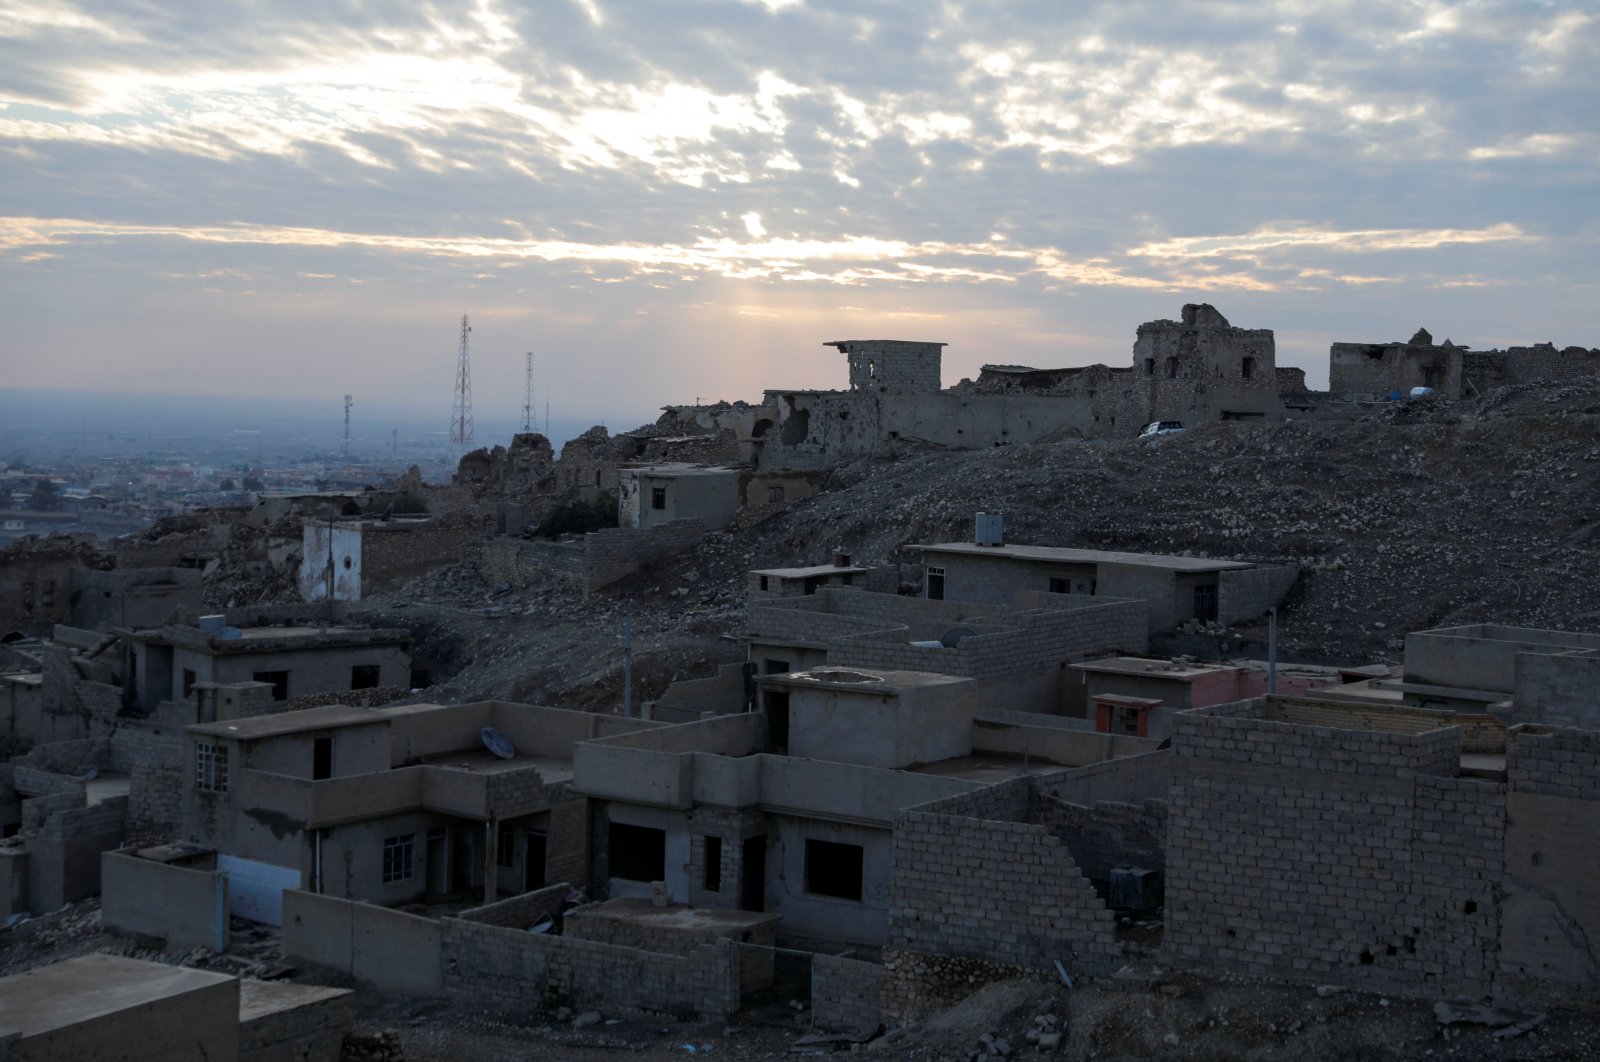 A view shows houses destroyed in past Daesh attacks, in the town of Sinjar, Iraq, Jan. 24, 2022. (Reuters Photo)